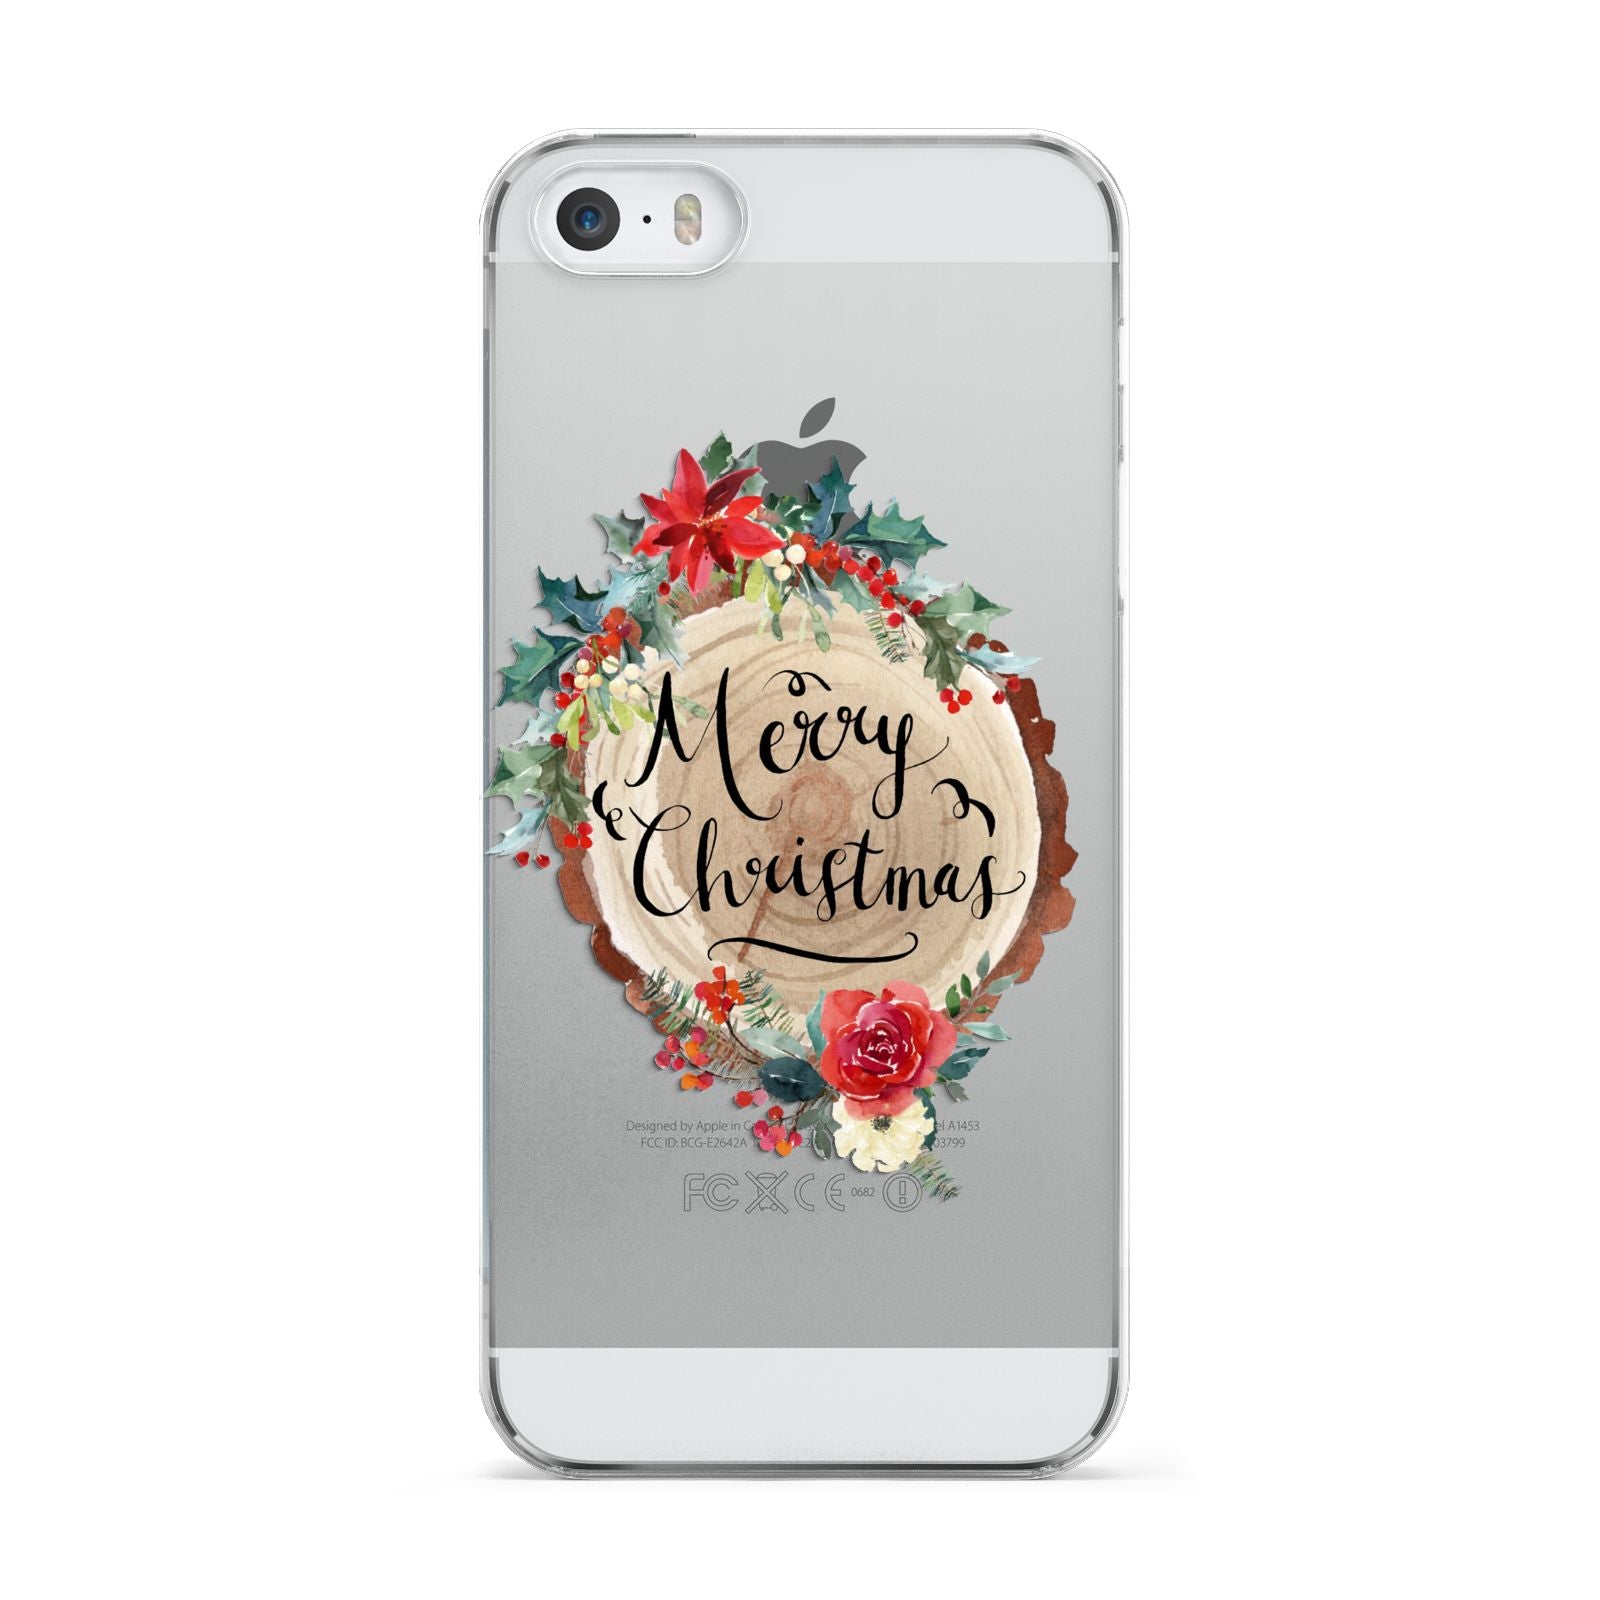 Merry Christmas Log Floral Apple iPhone 5 Case